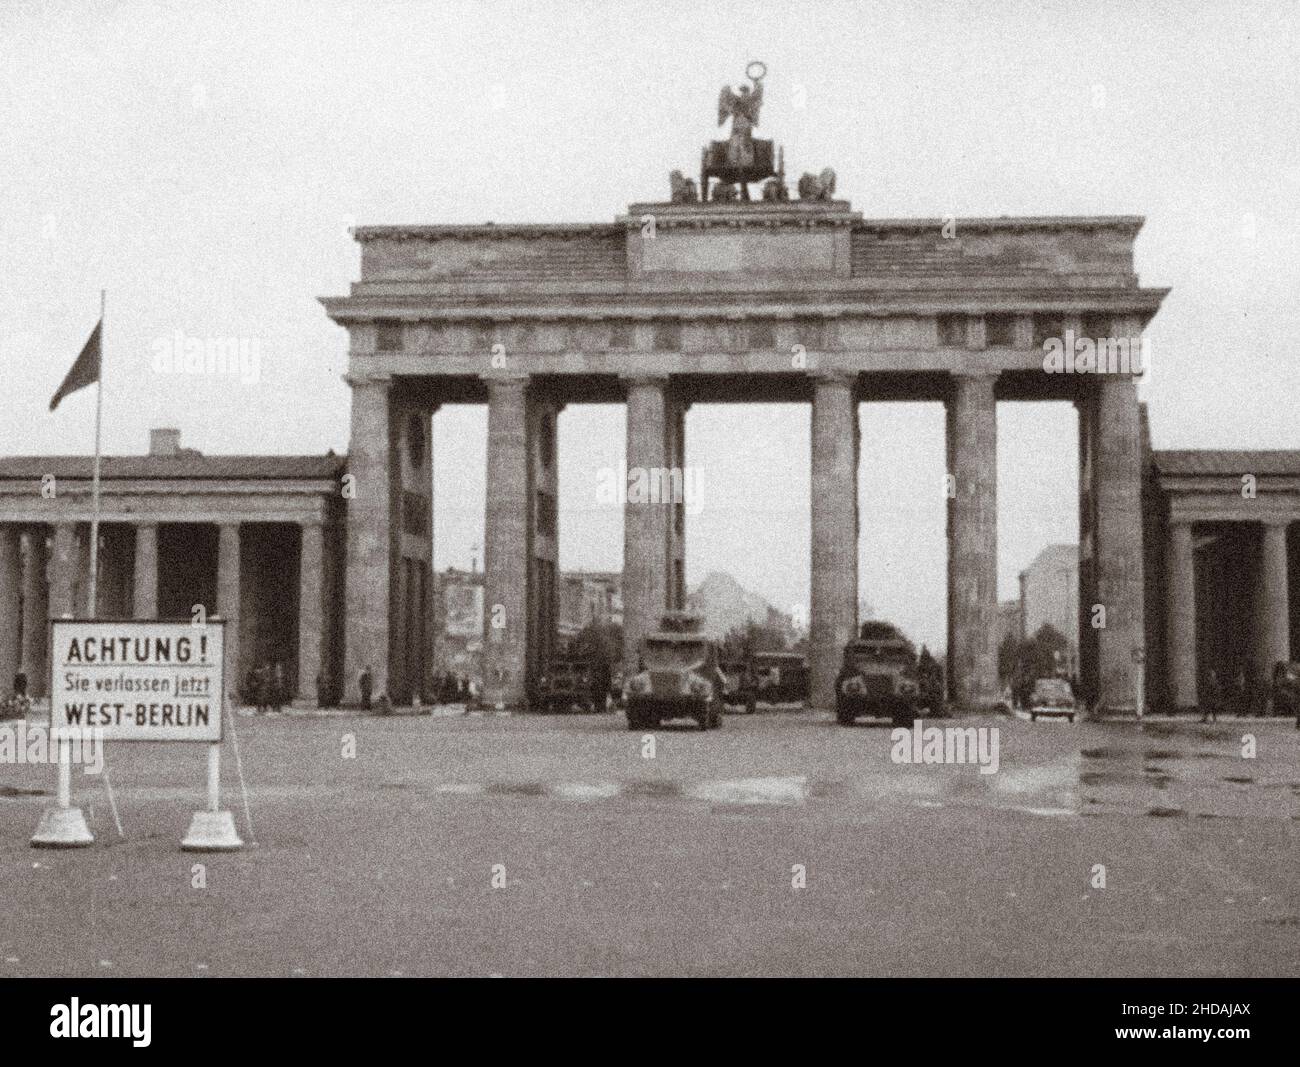 Berlin Crisis of 1961. East German patrols near the Brandenburg Gate. Serie of archivel photos depicts the August 1961 travel ban between East and Wes Stock Photo